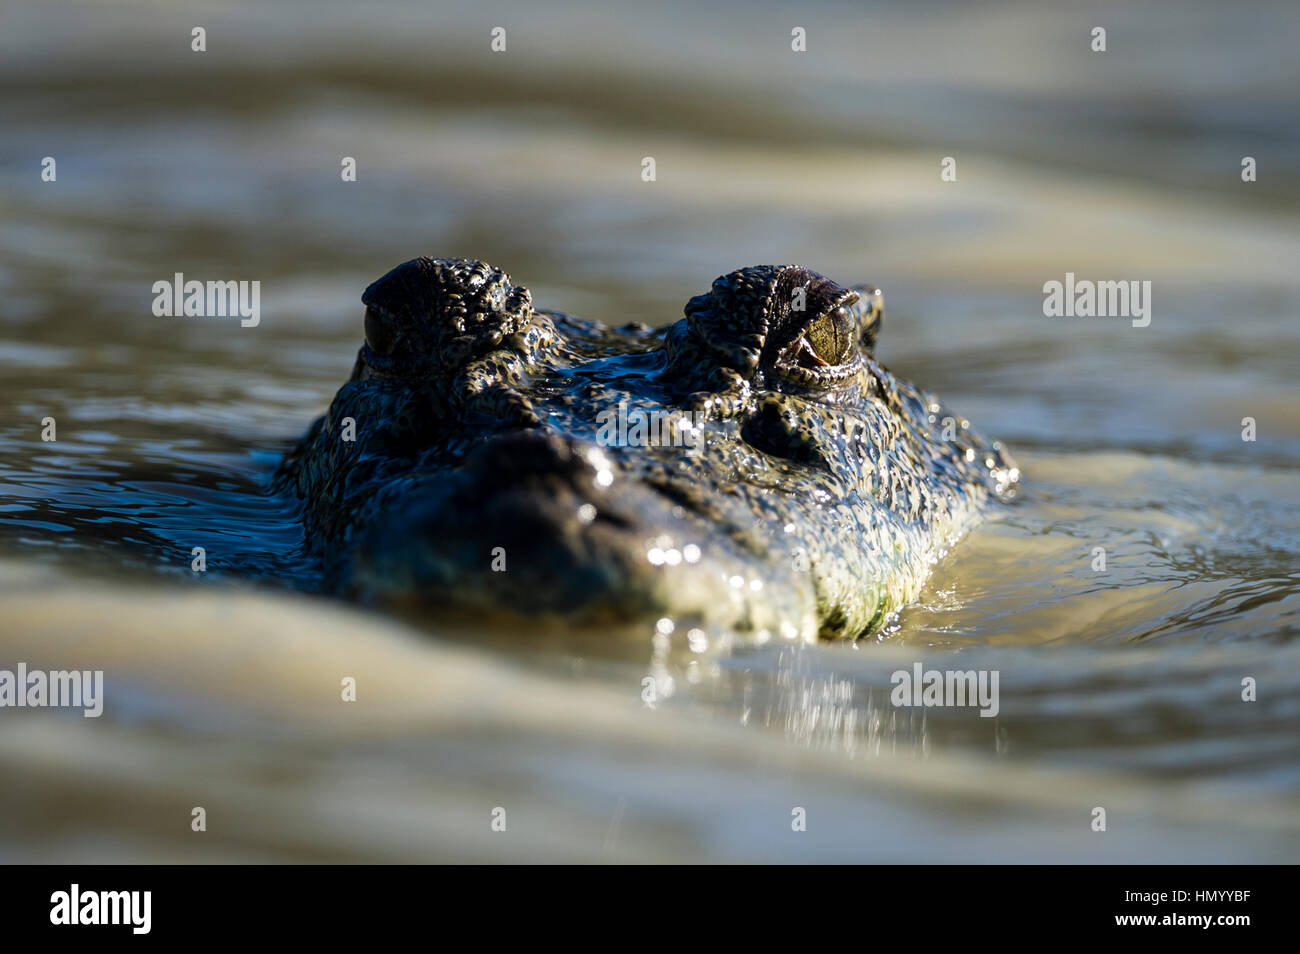 The menacing stare of a Saltwater Crocodile swimming in a murky river. Stock Photo